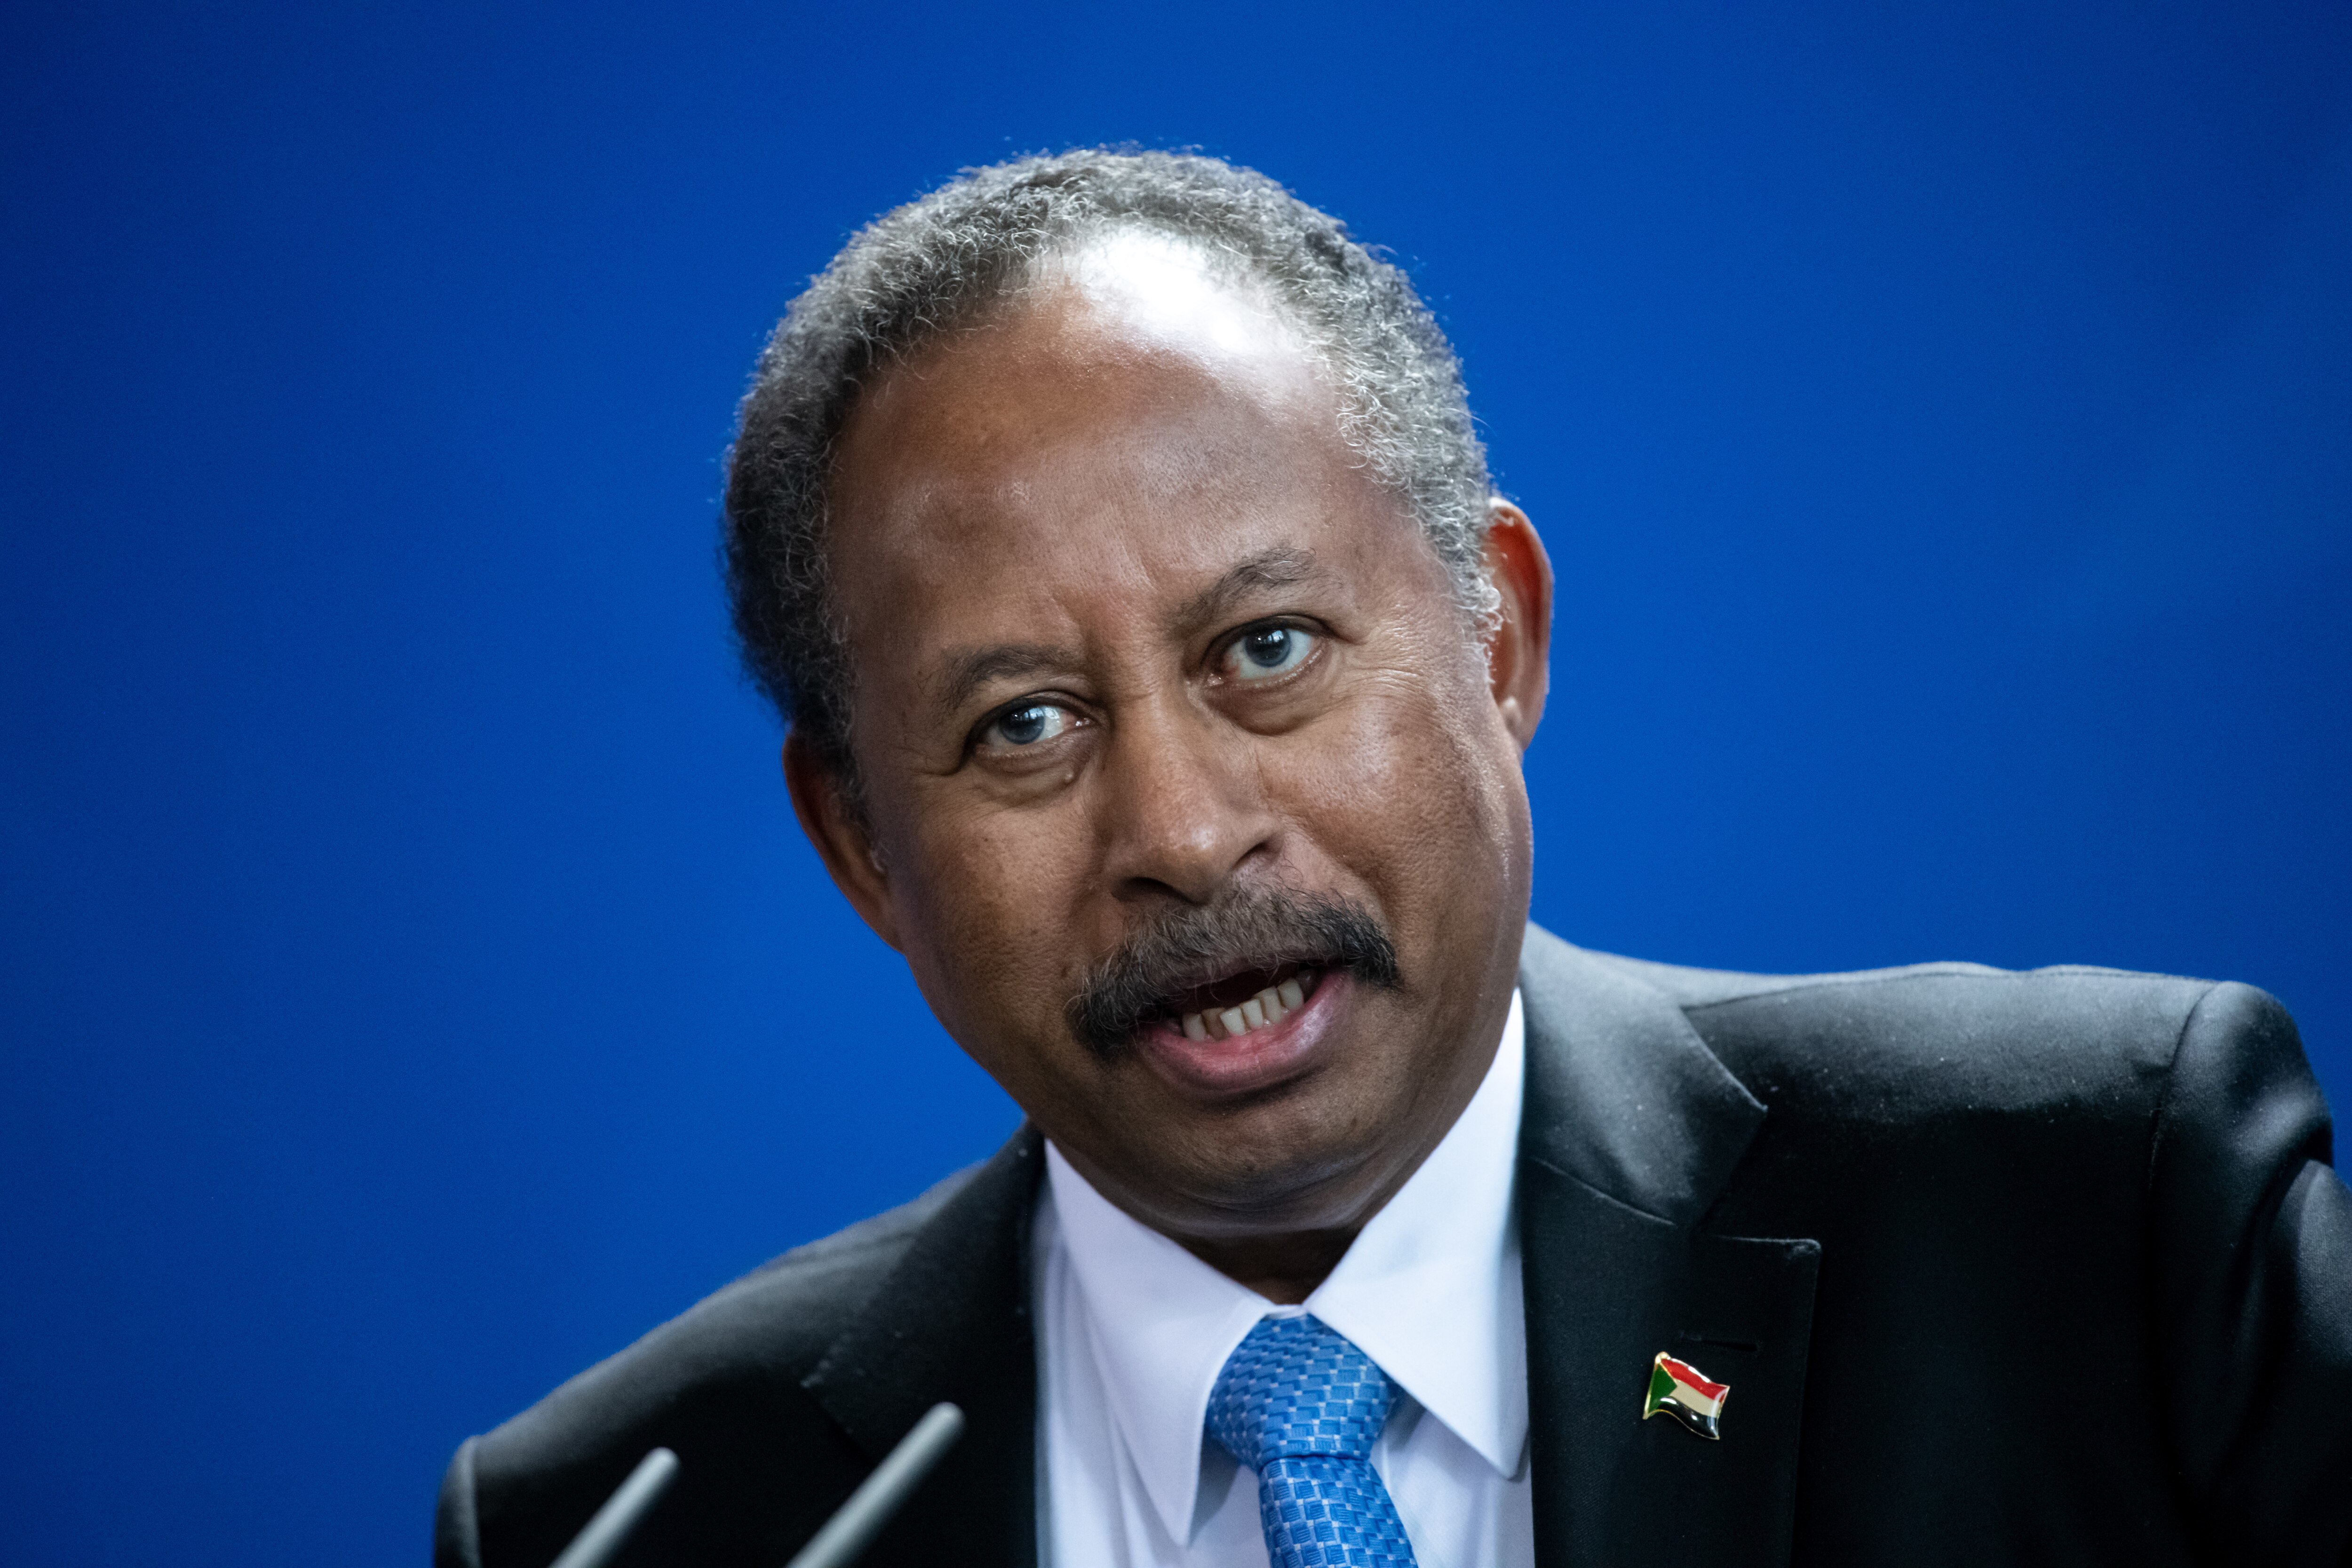 Abdullah Hamduk, former Prime Minister of Sudan and former head of Sudan's interim government, speaks during a press conference before being ousted from power.